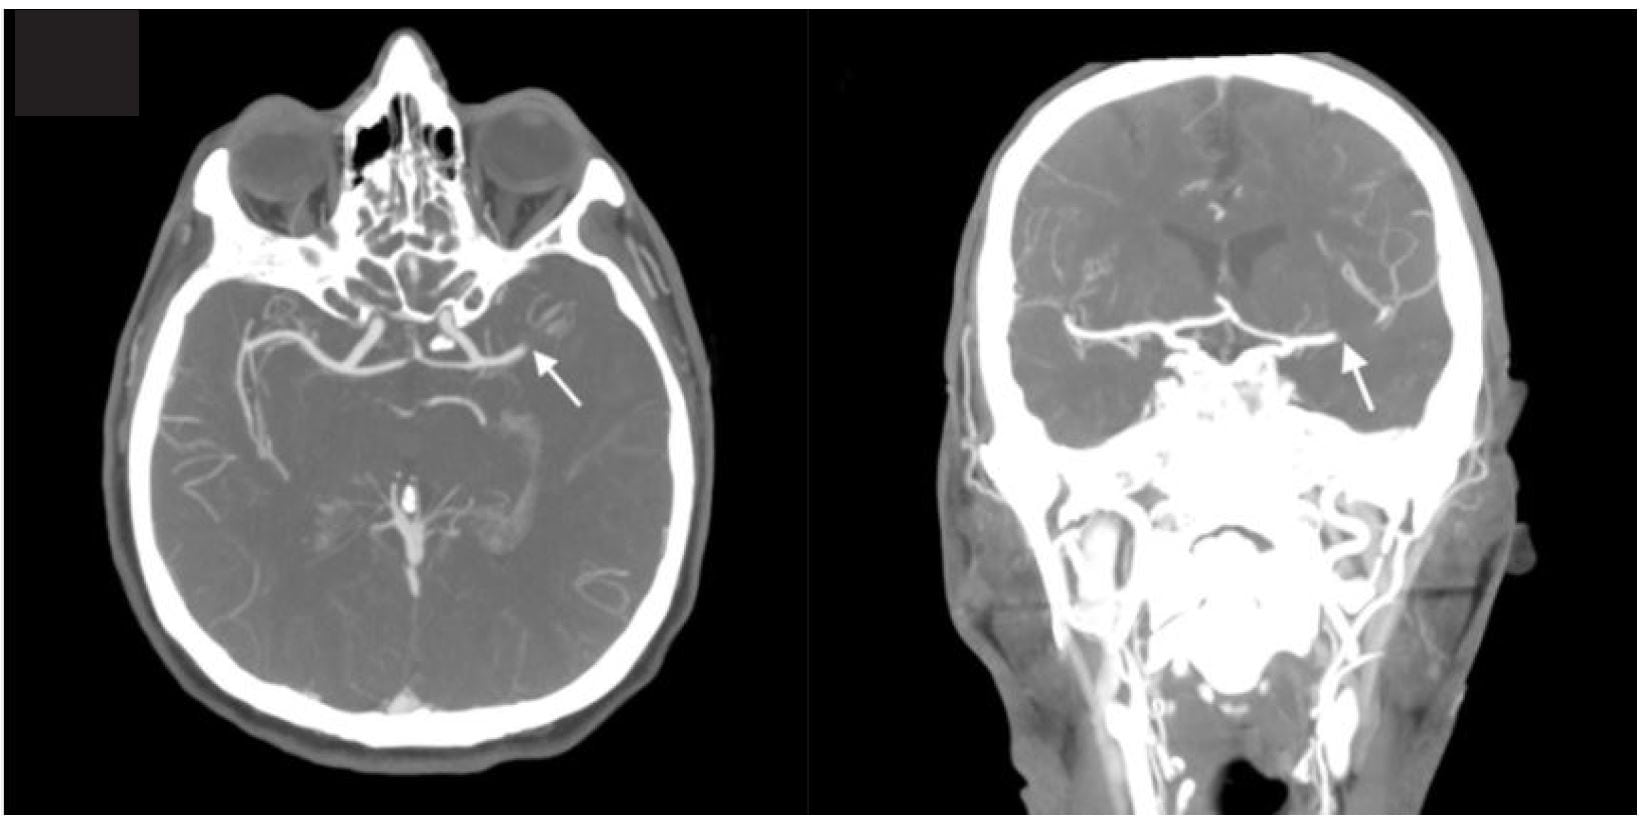 Usefulness of Computed Tomography Perfusion in Treatment of an Acute Stroke Patient with Unknown Time of Symptom Onset